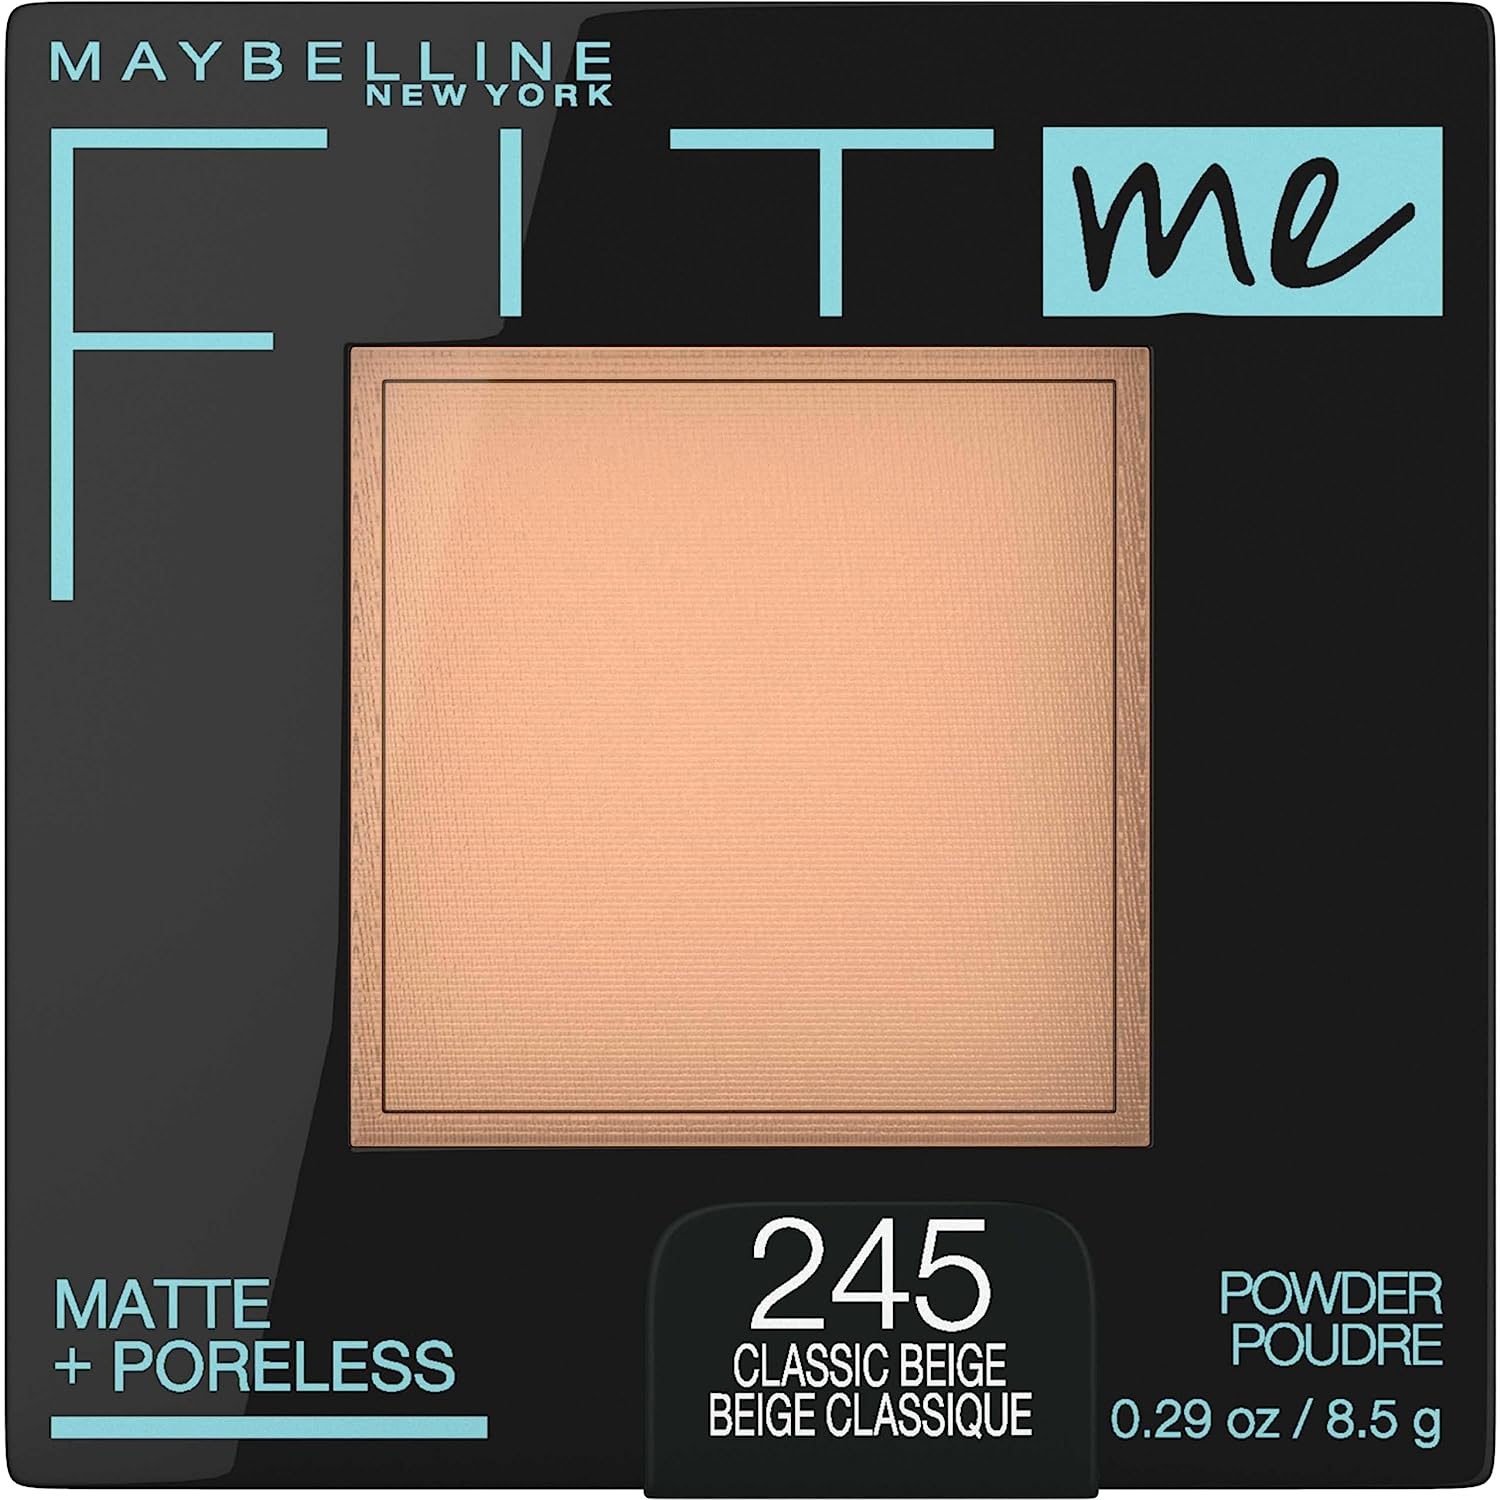 Fit Me Polvo - 245 – CosmeticLotsGT